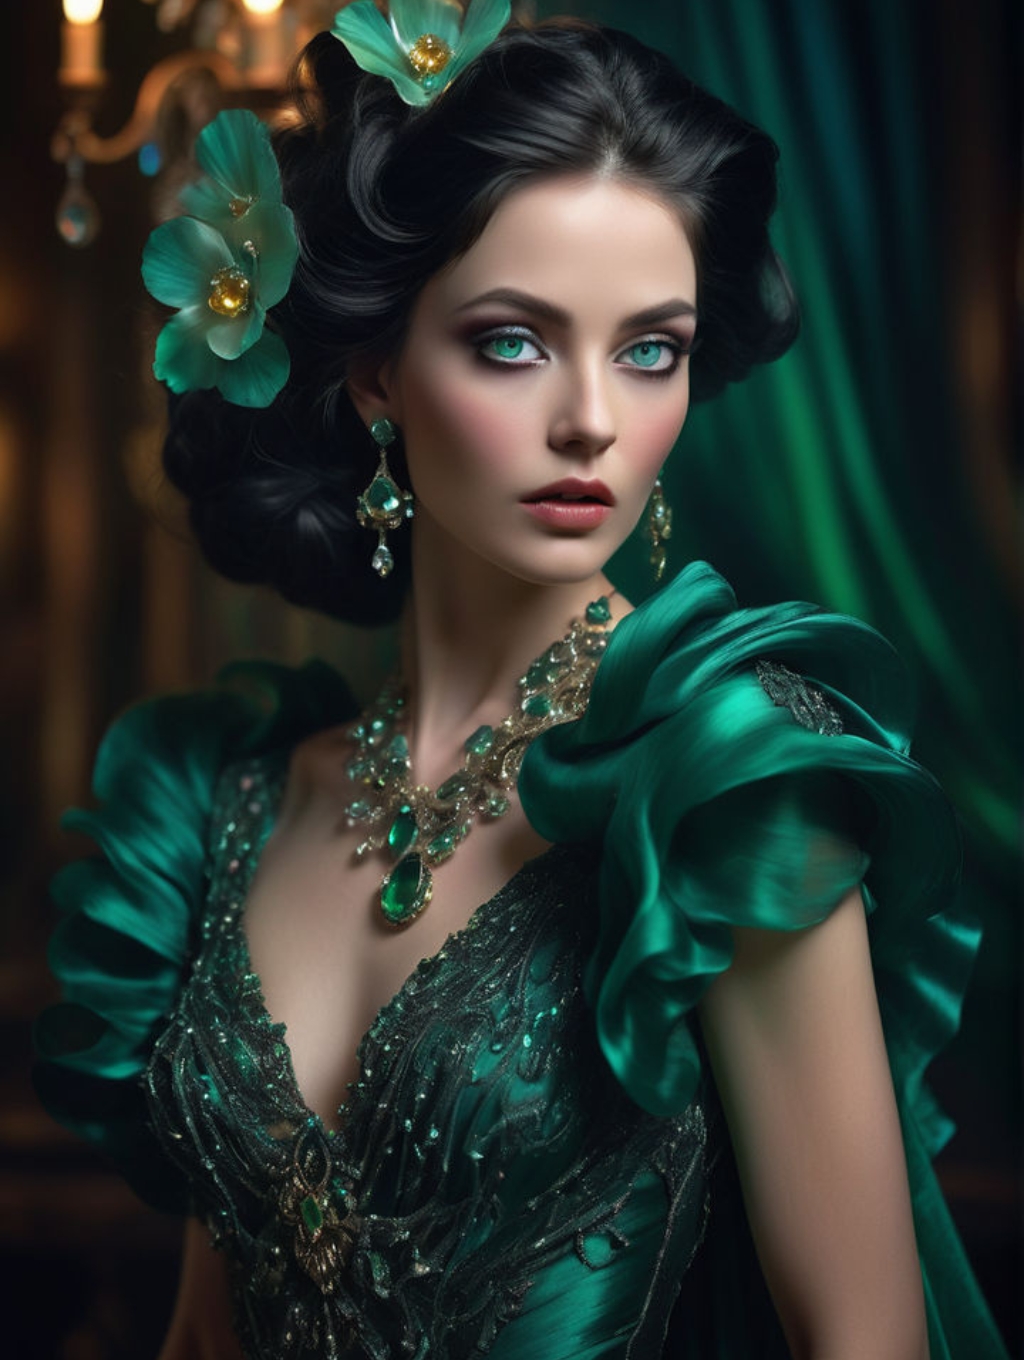 Glamorous Occasions: Profile Pictures & Art Portraits-Theme:5